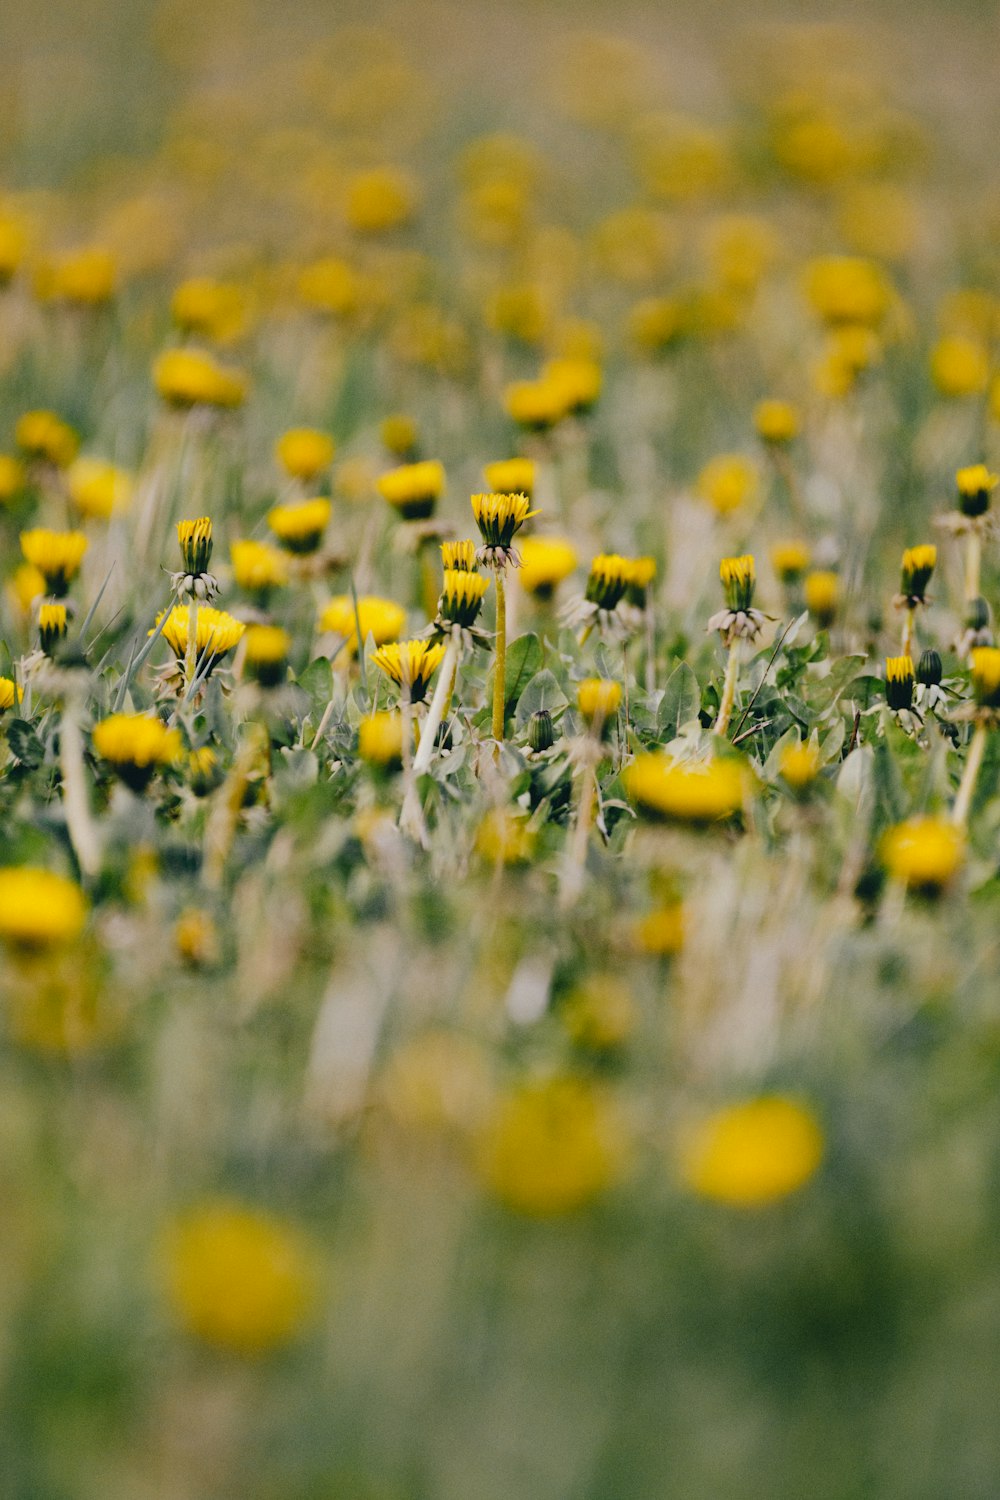 a field full of yellow flowers on a sunny day